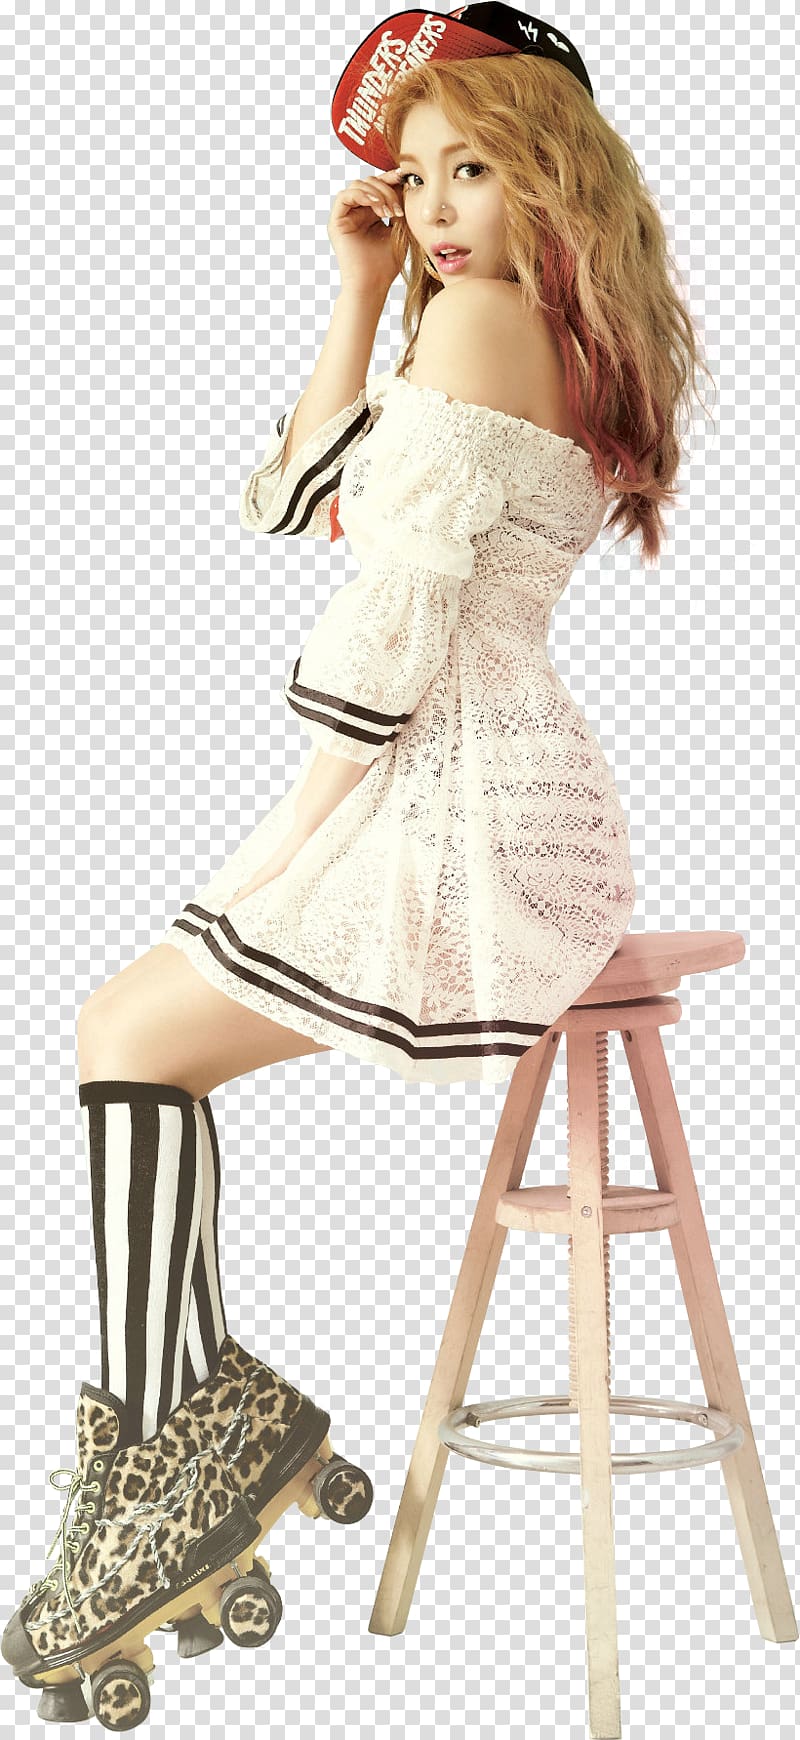 Ailee Rendering Invitation, Kw Special Projects transparent background PNG clipart